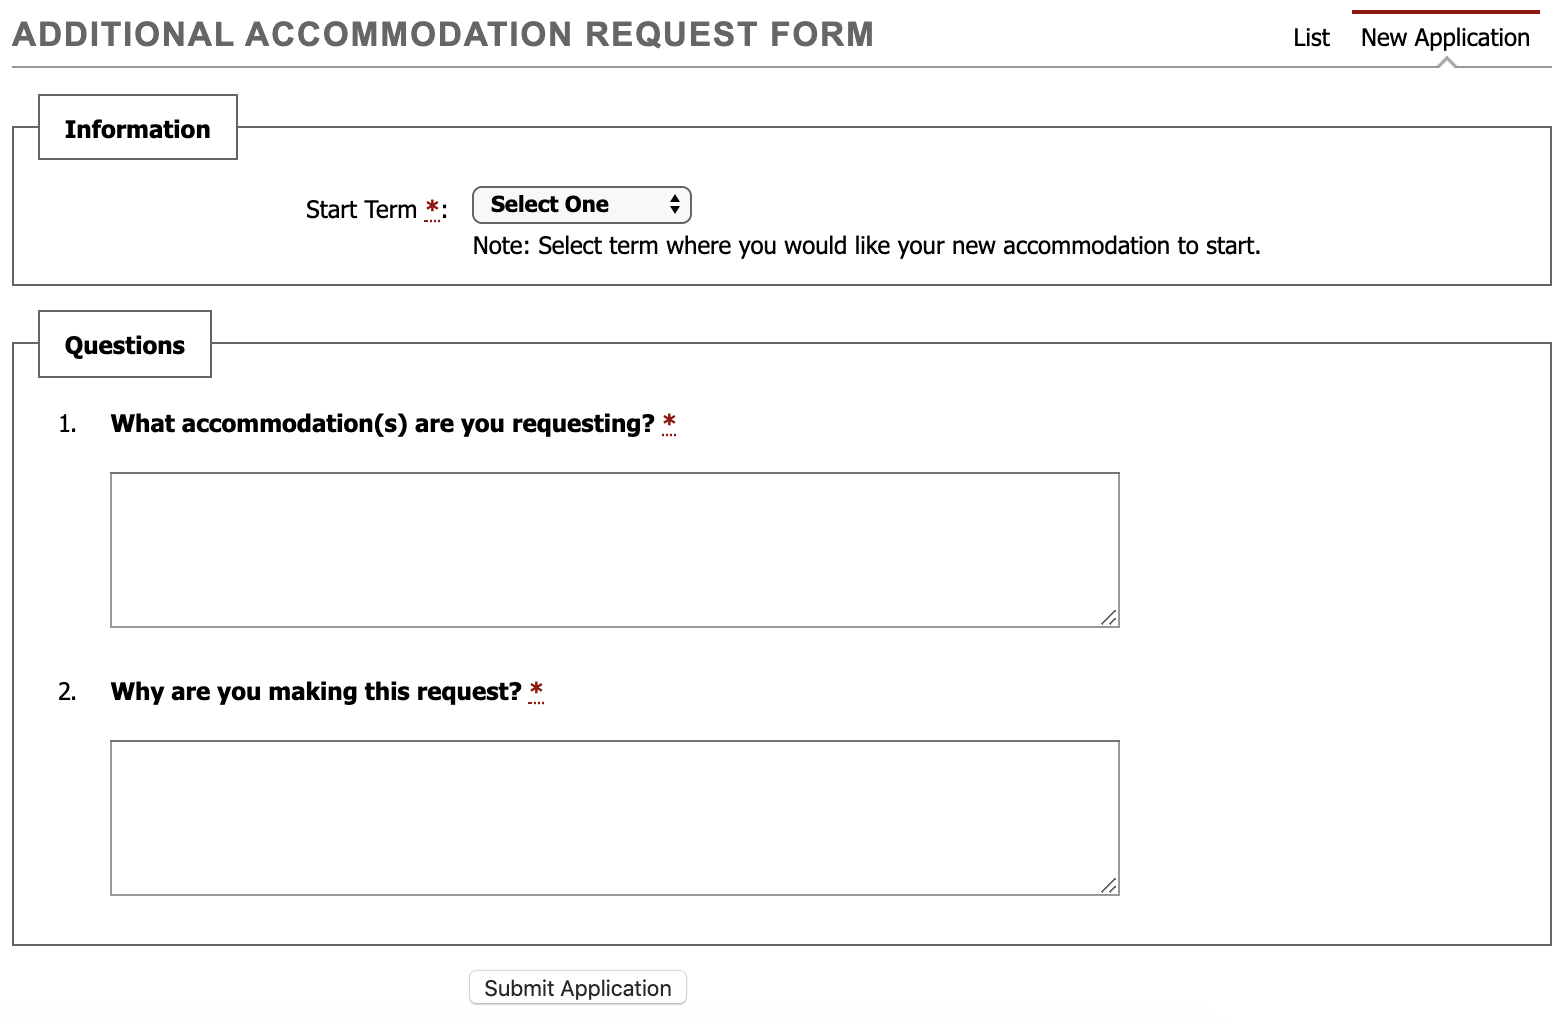 information fields for additional accommodation request form